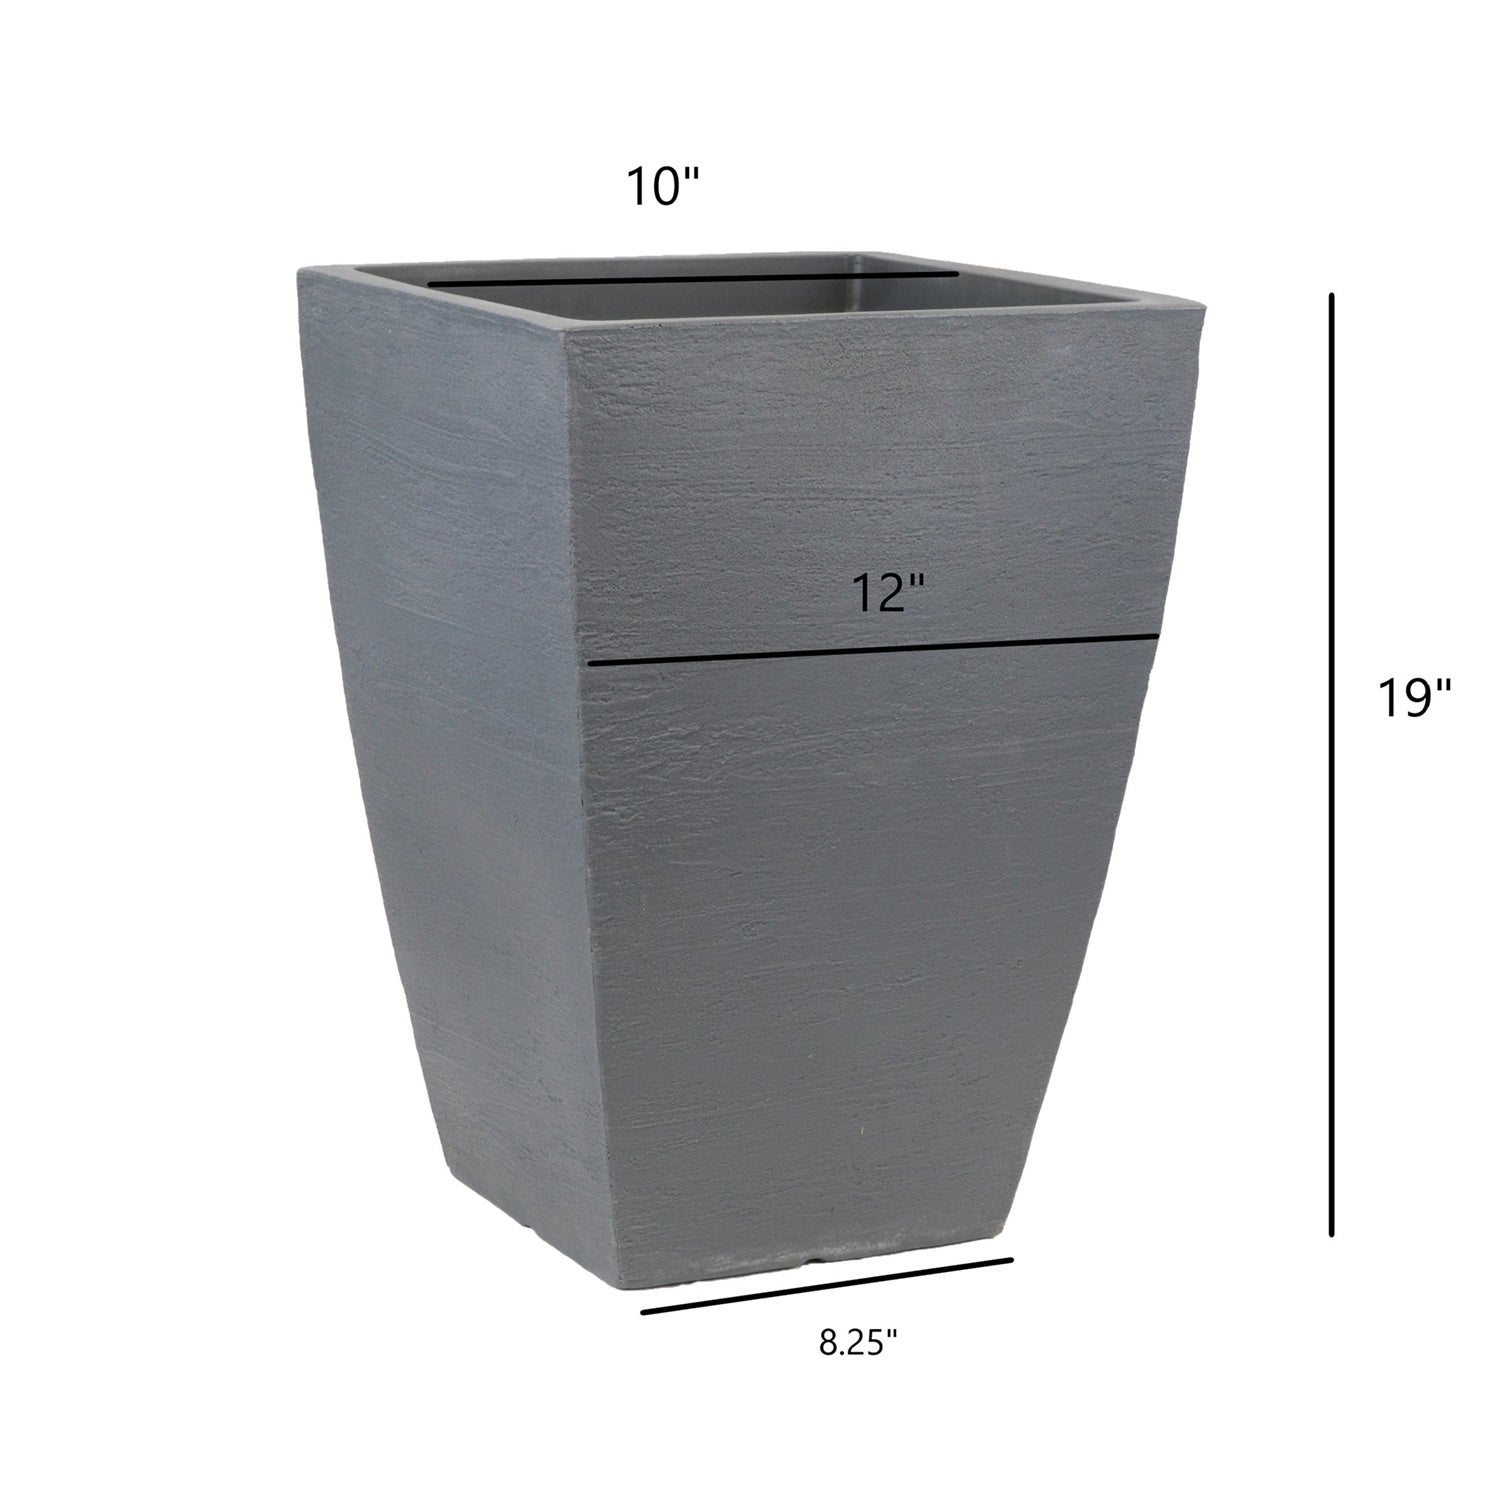 Tusco Products Modern Planter, Tall Square, Slate – 12” x 19”